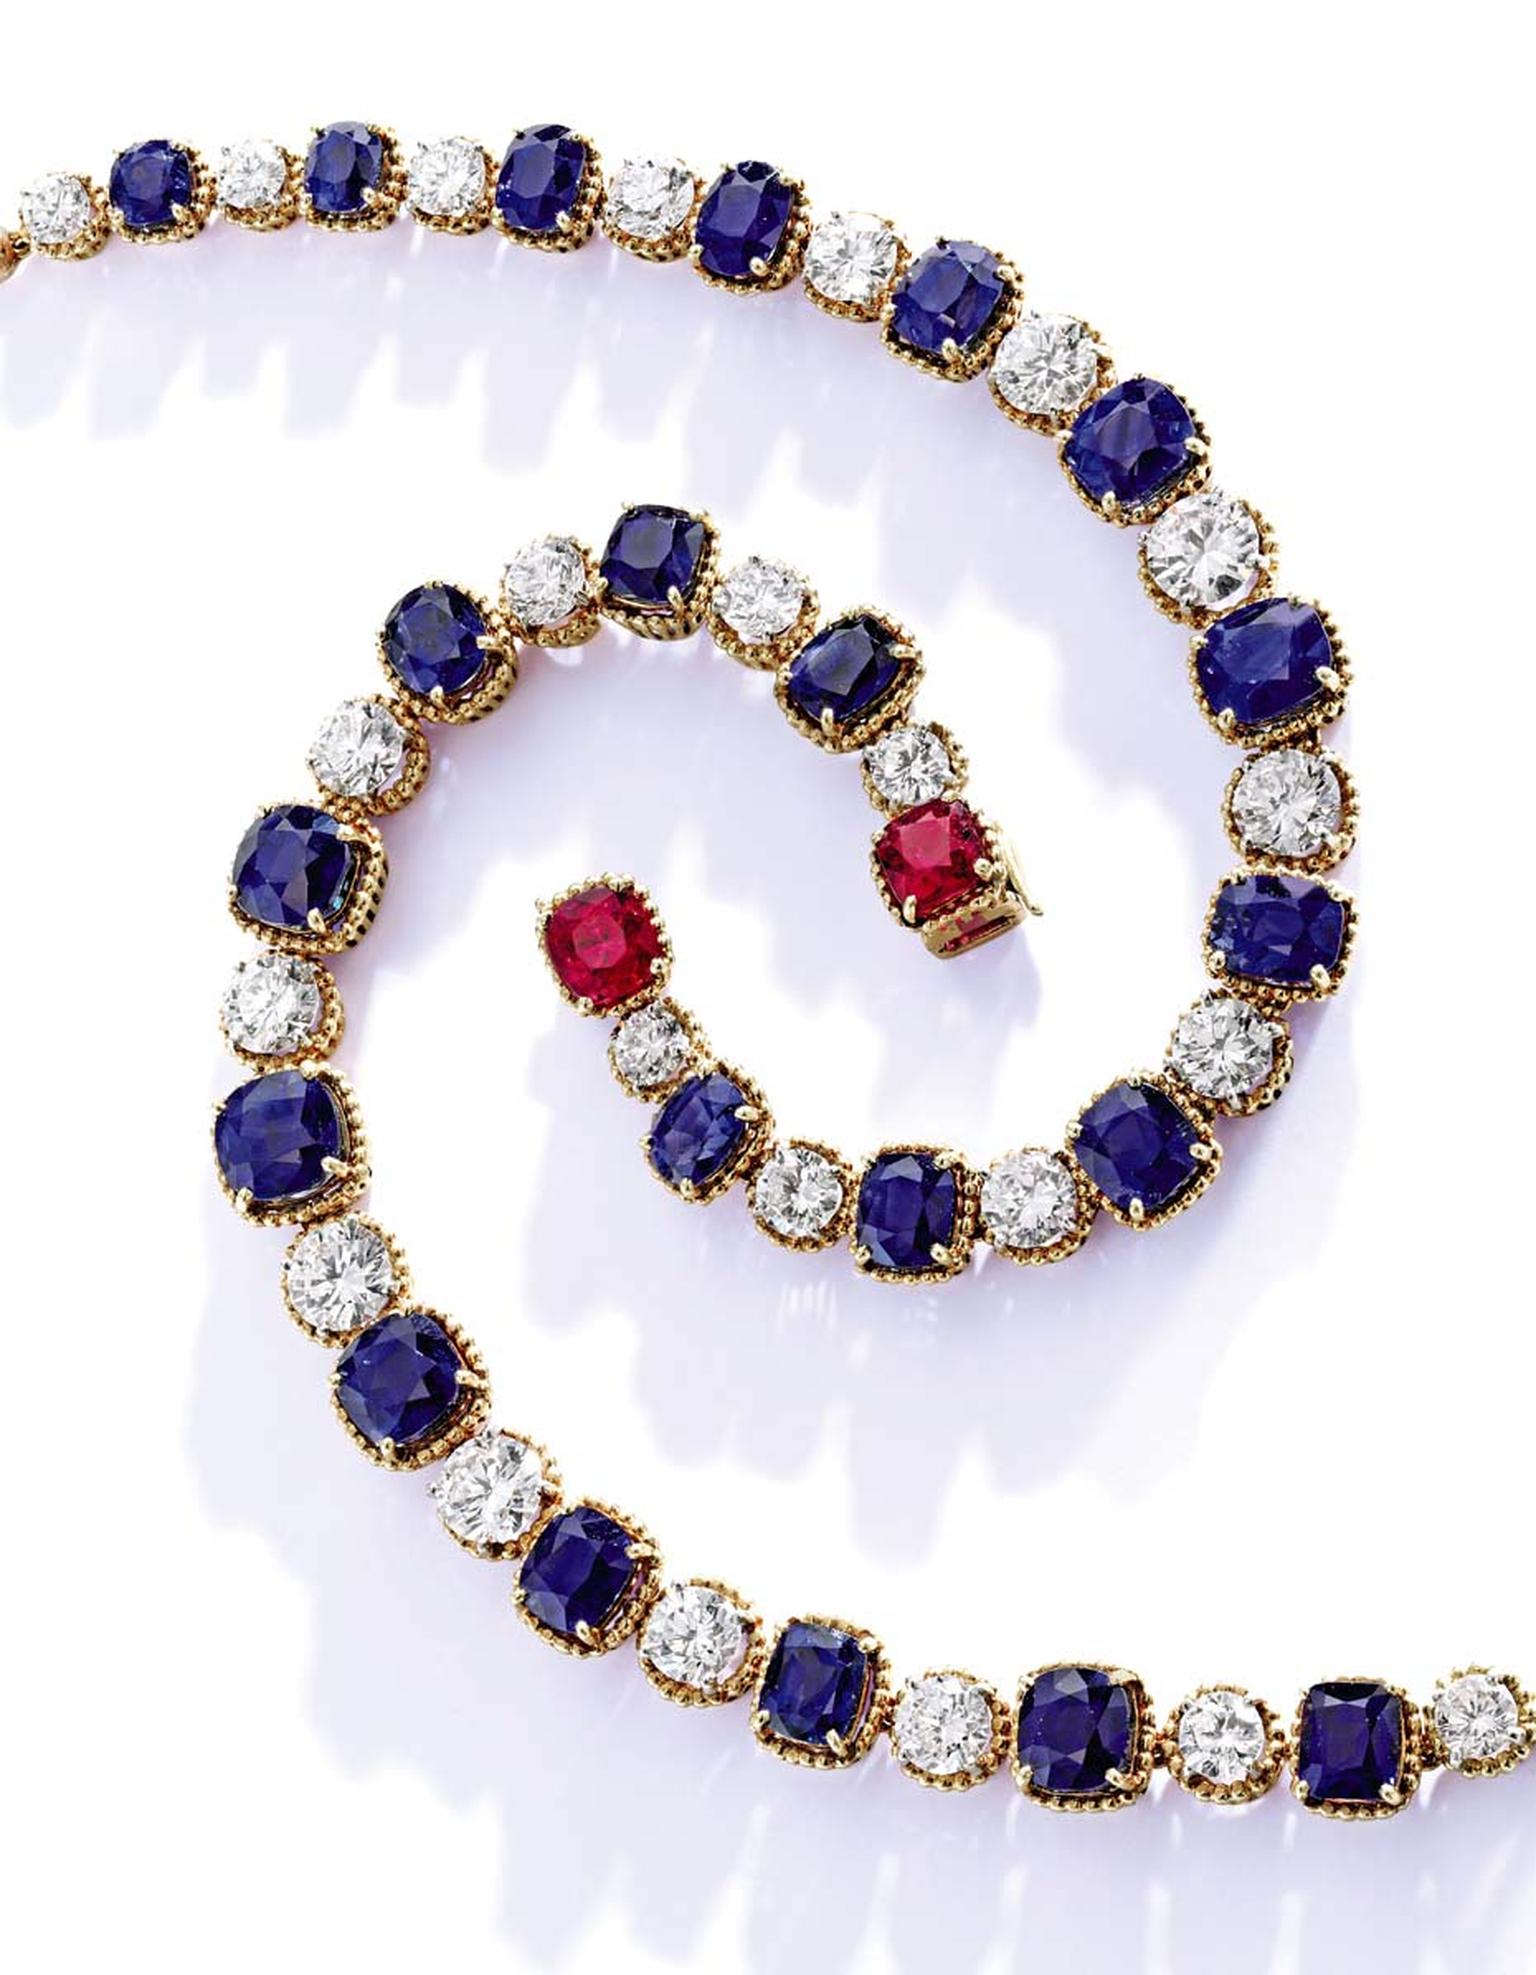 A pair of diamond, sapphire and ruby bracelets from Bunny Mellon's jewelry collection (estimate: $150,000-200,000 each).